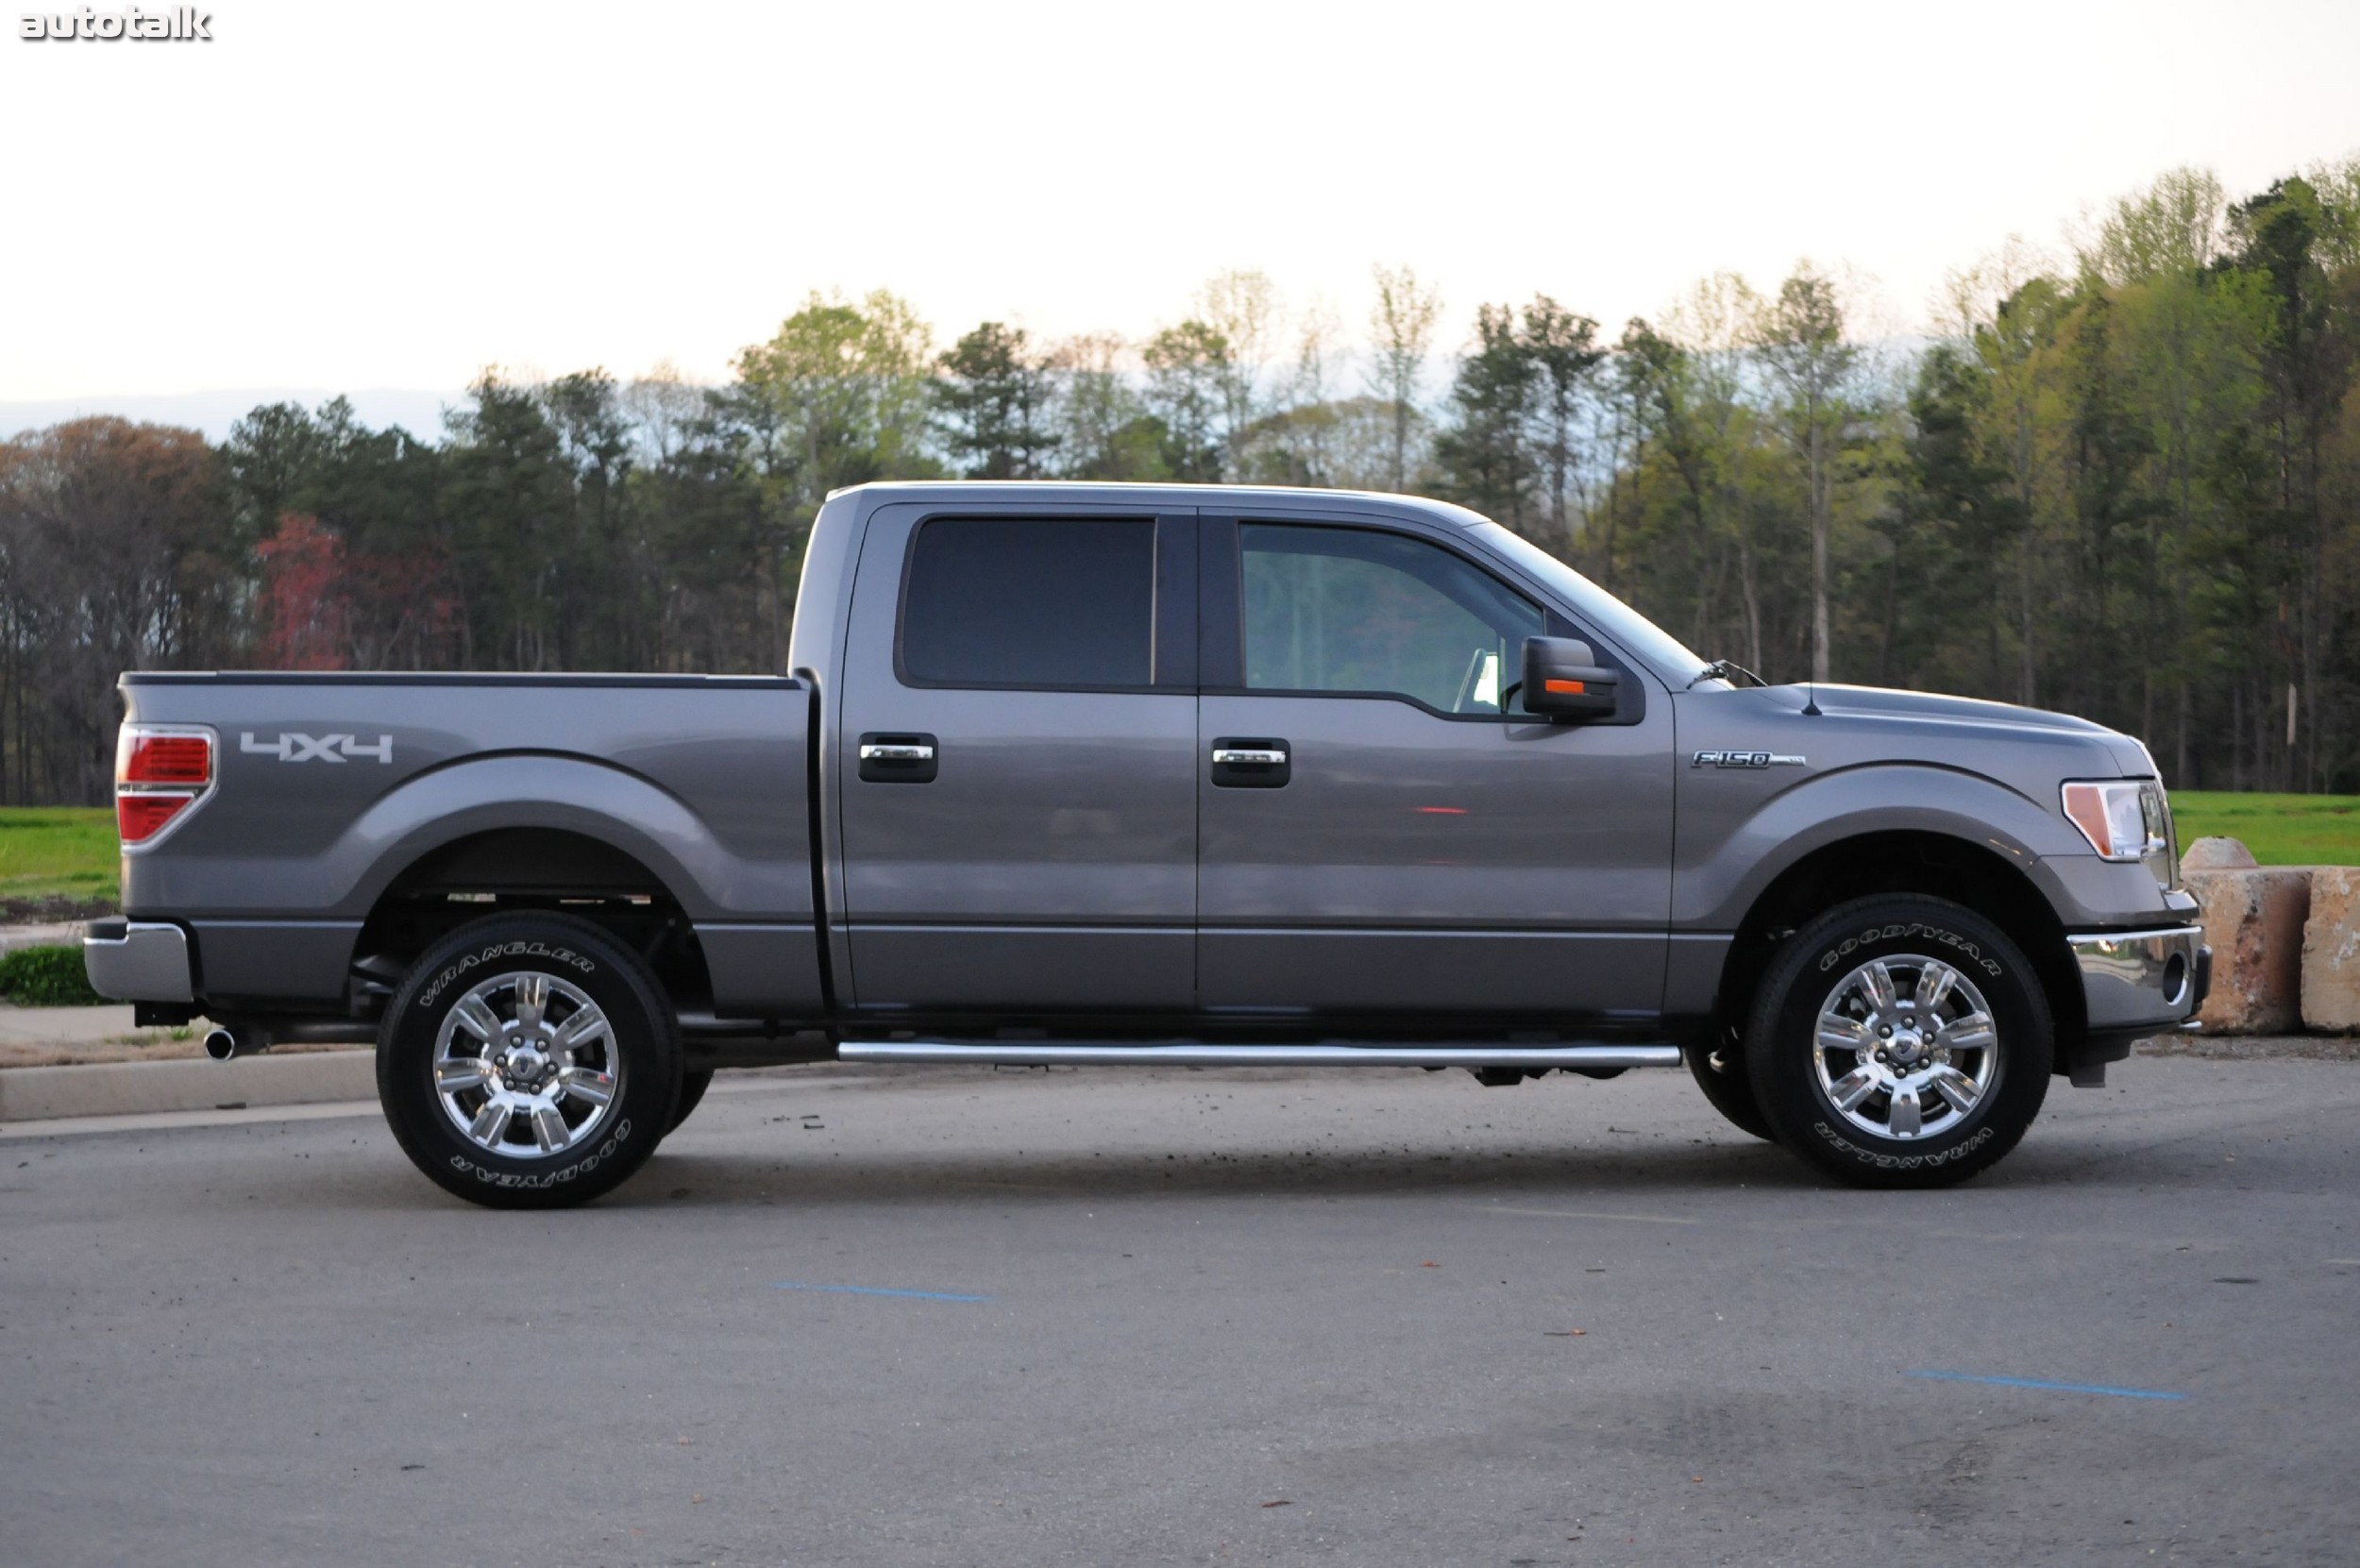 2011 Ford F-150 Crew Cab Review